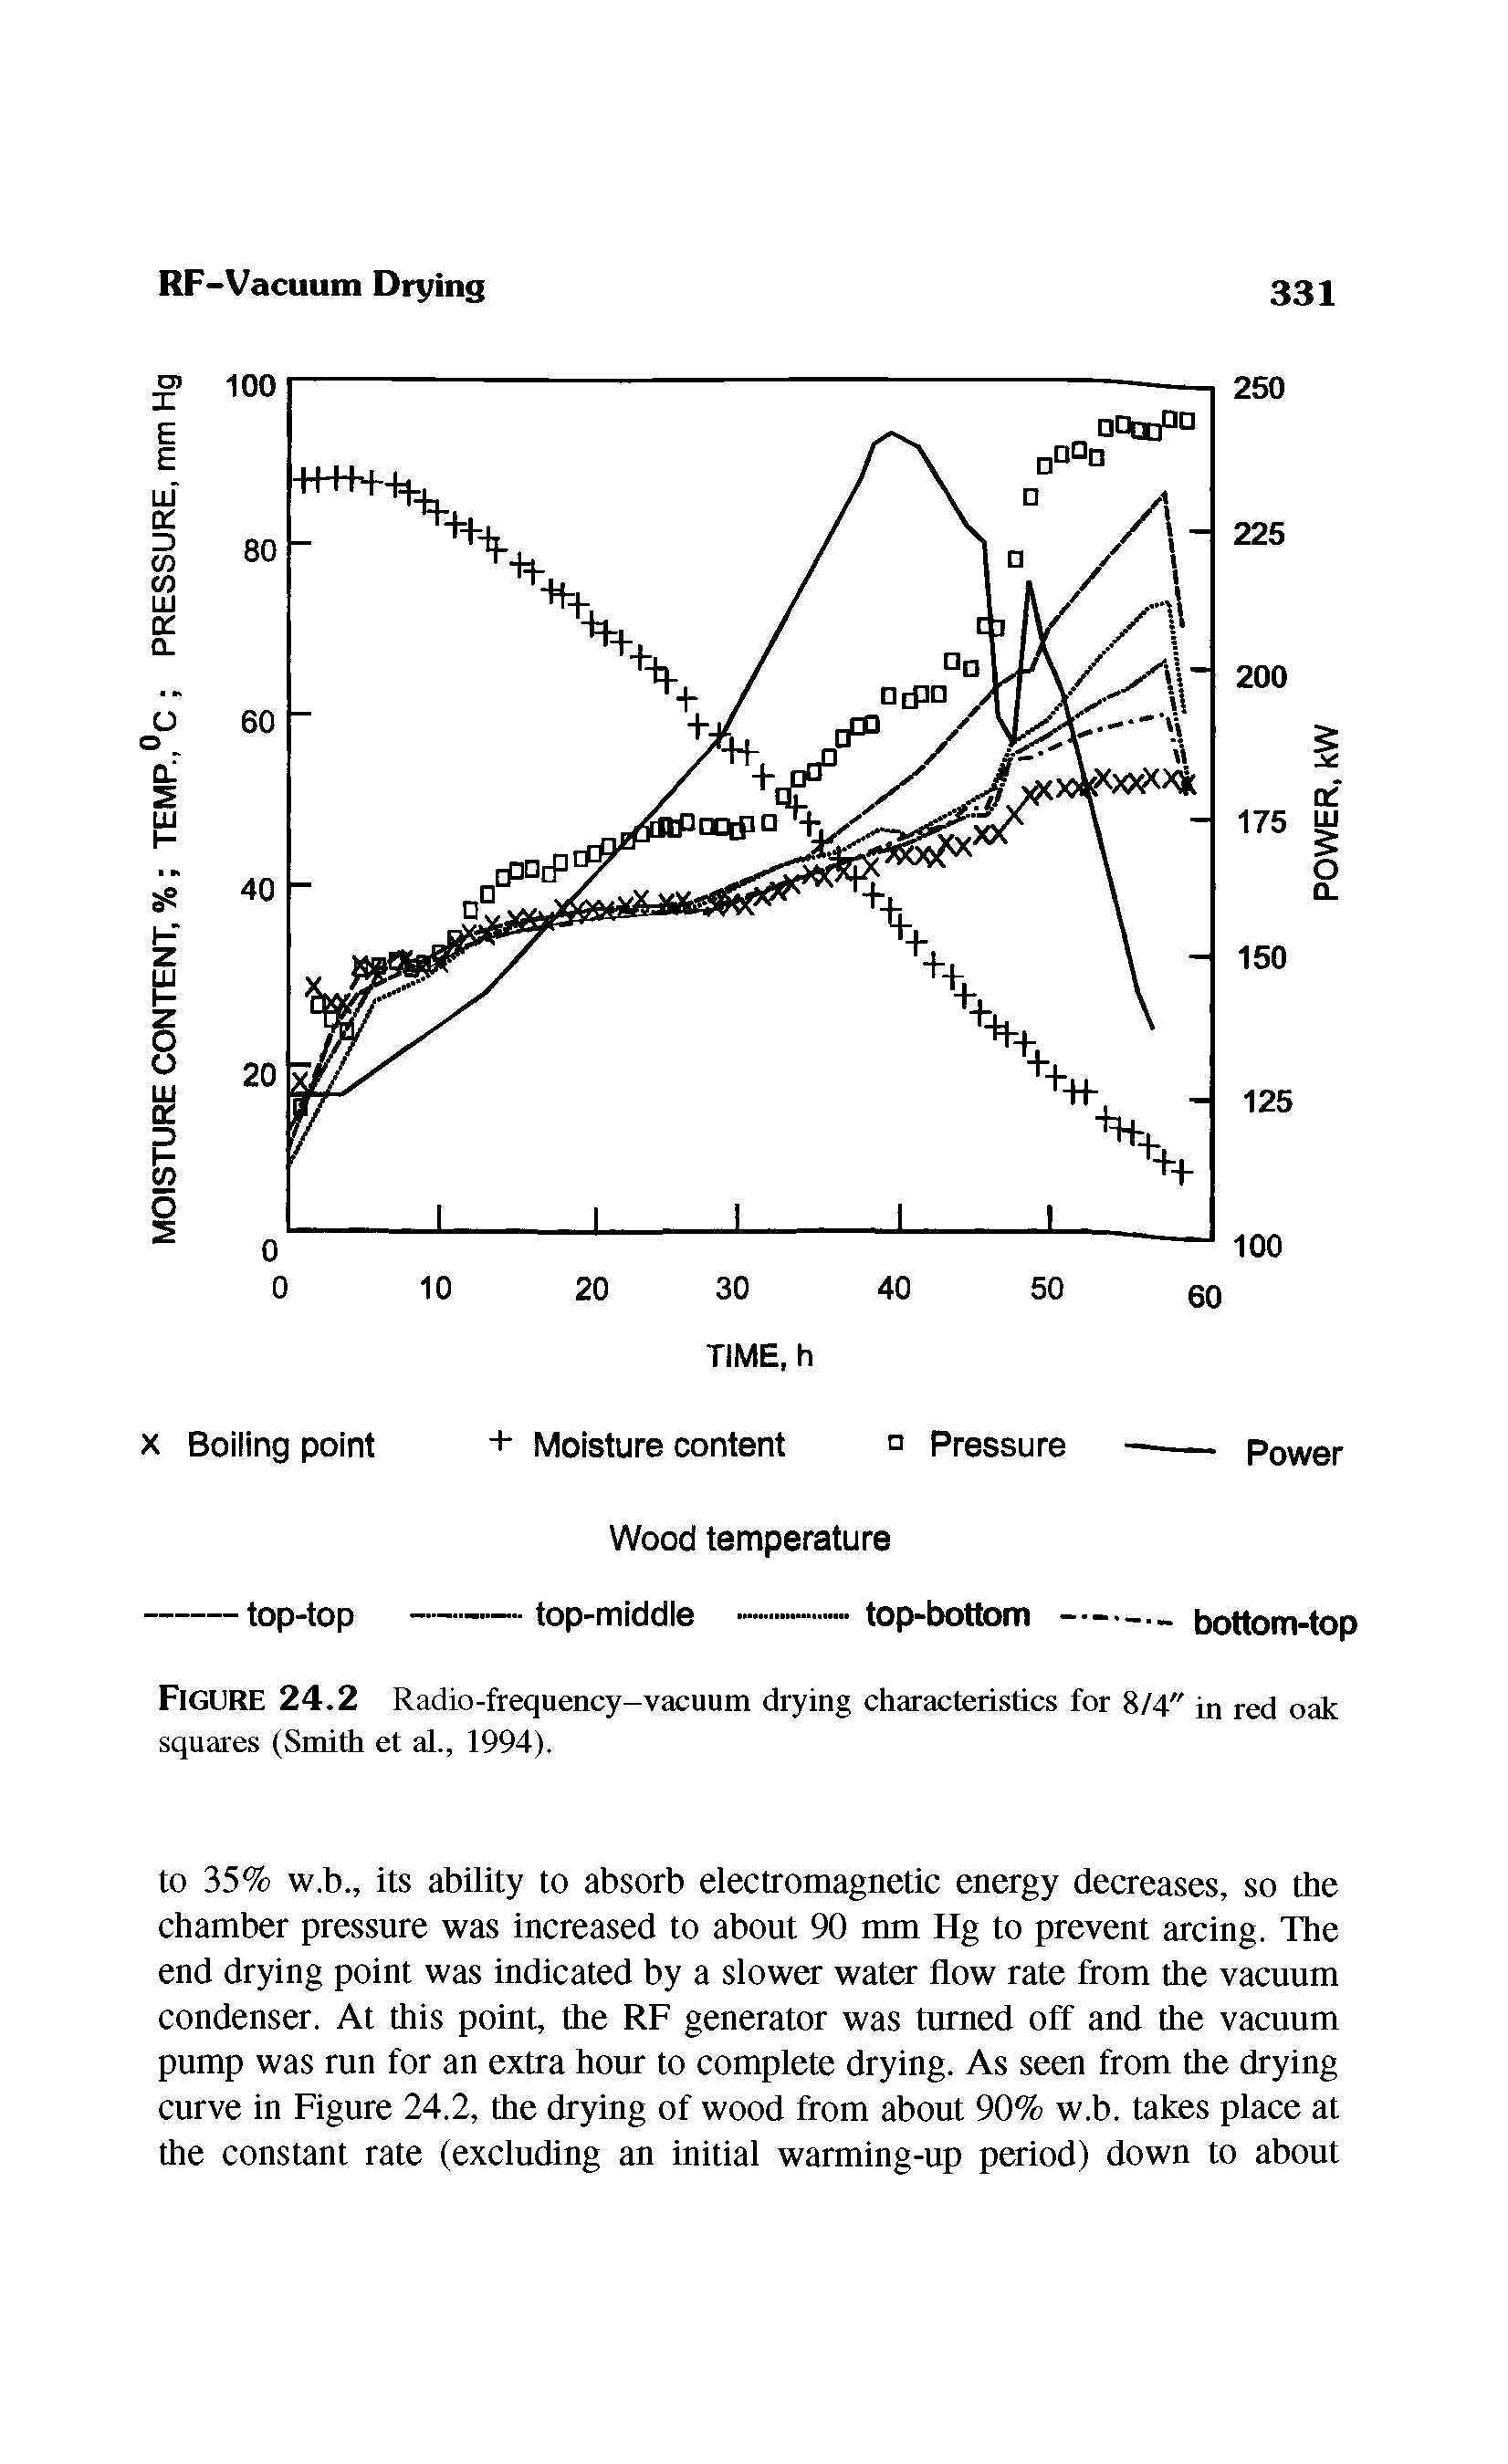 Figure 24.2 Radio-frequency-vacuum drying characteristics for 8/4" in red oak squares (Smith et al., 1994).